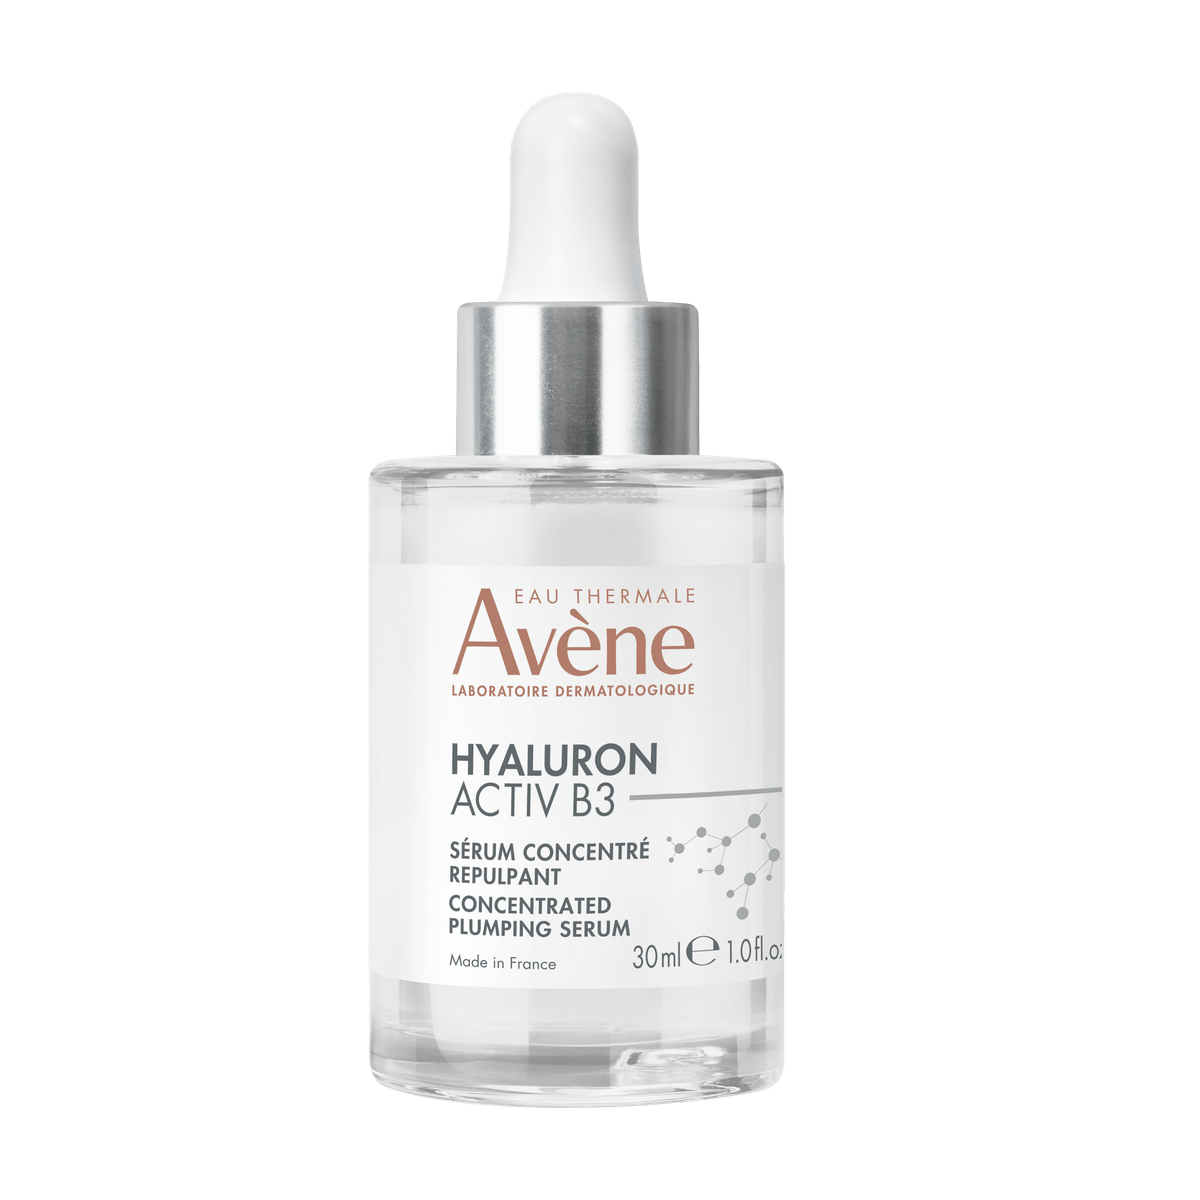 Daily Vanity Beauty Awards 2024 Best Skincare Avene Hyaluron Activ B3 Concentrated Plumping Serum Voted By Beauty Experts